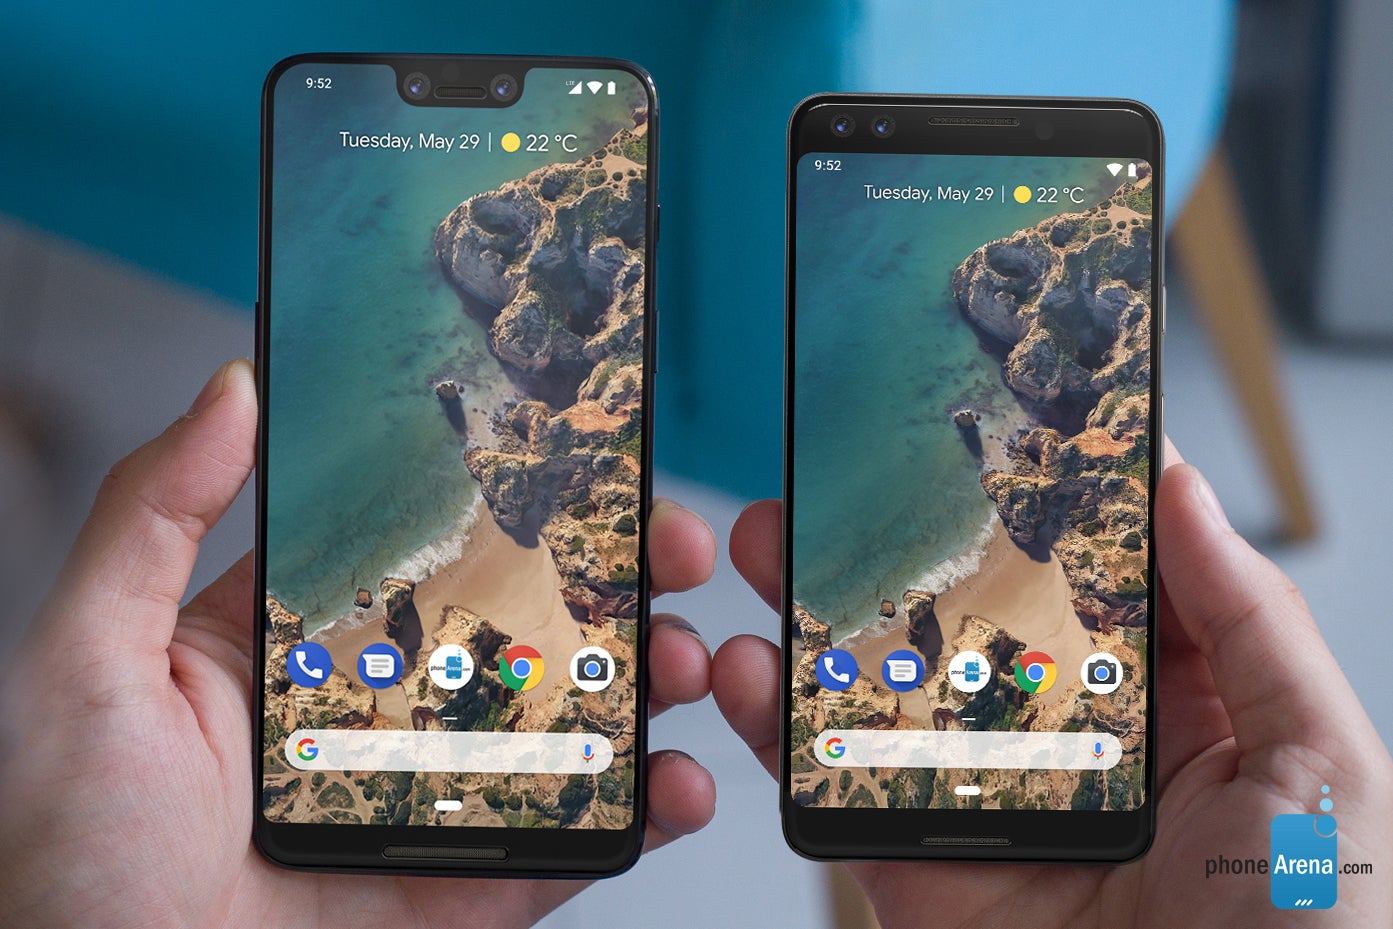 Google Pixel 3 and Pixel 3 XL price and release date: our expectations